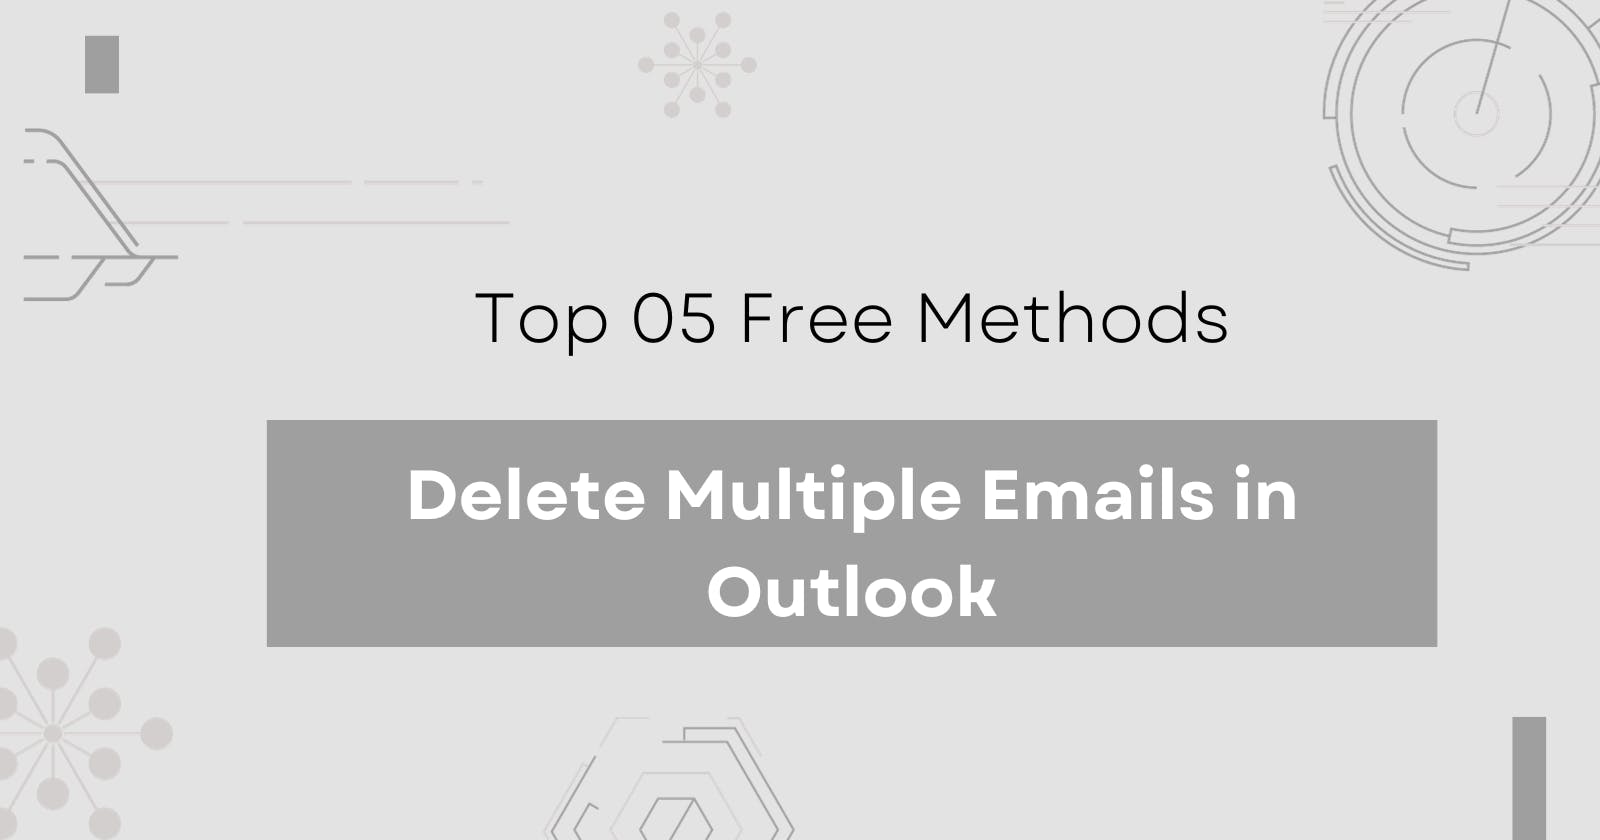 Top 05 Free Methods to Delete Multiple Emails in Outlook